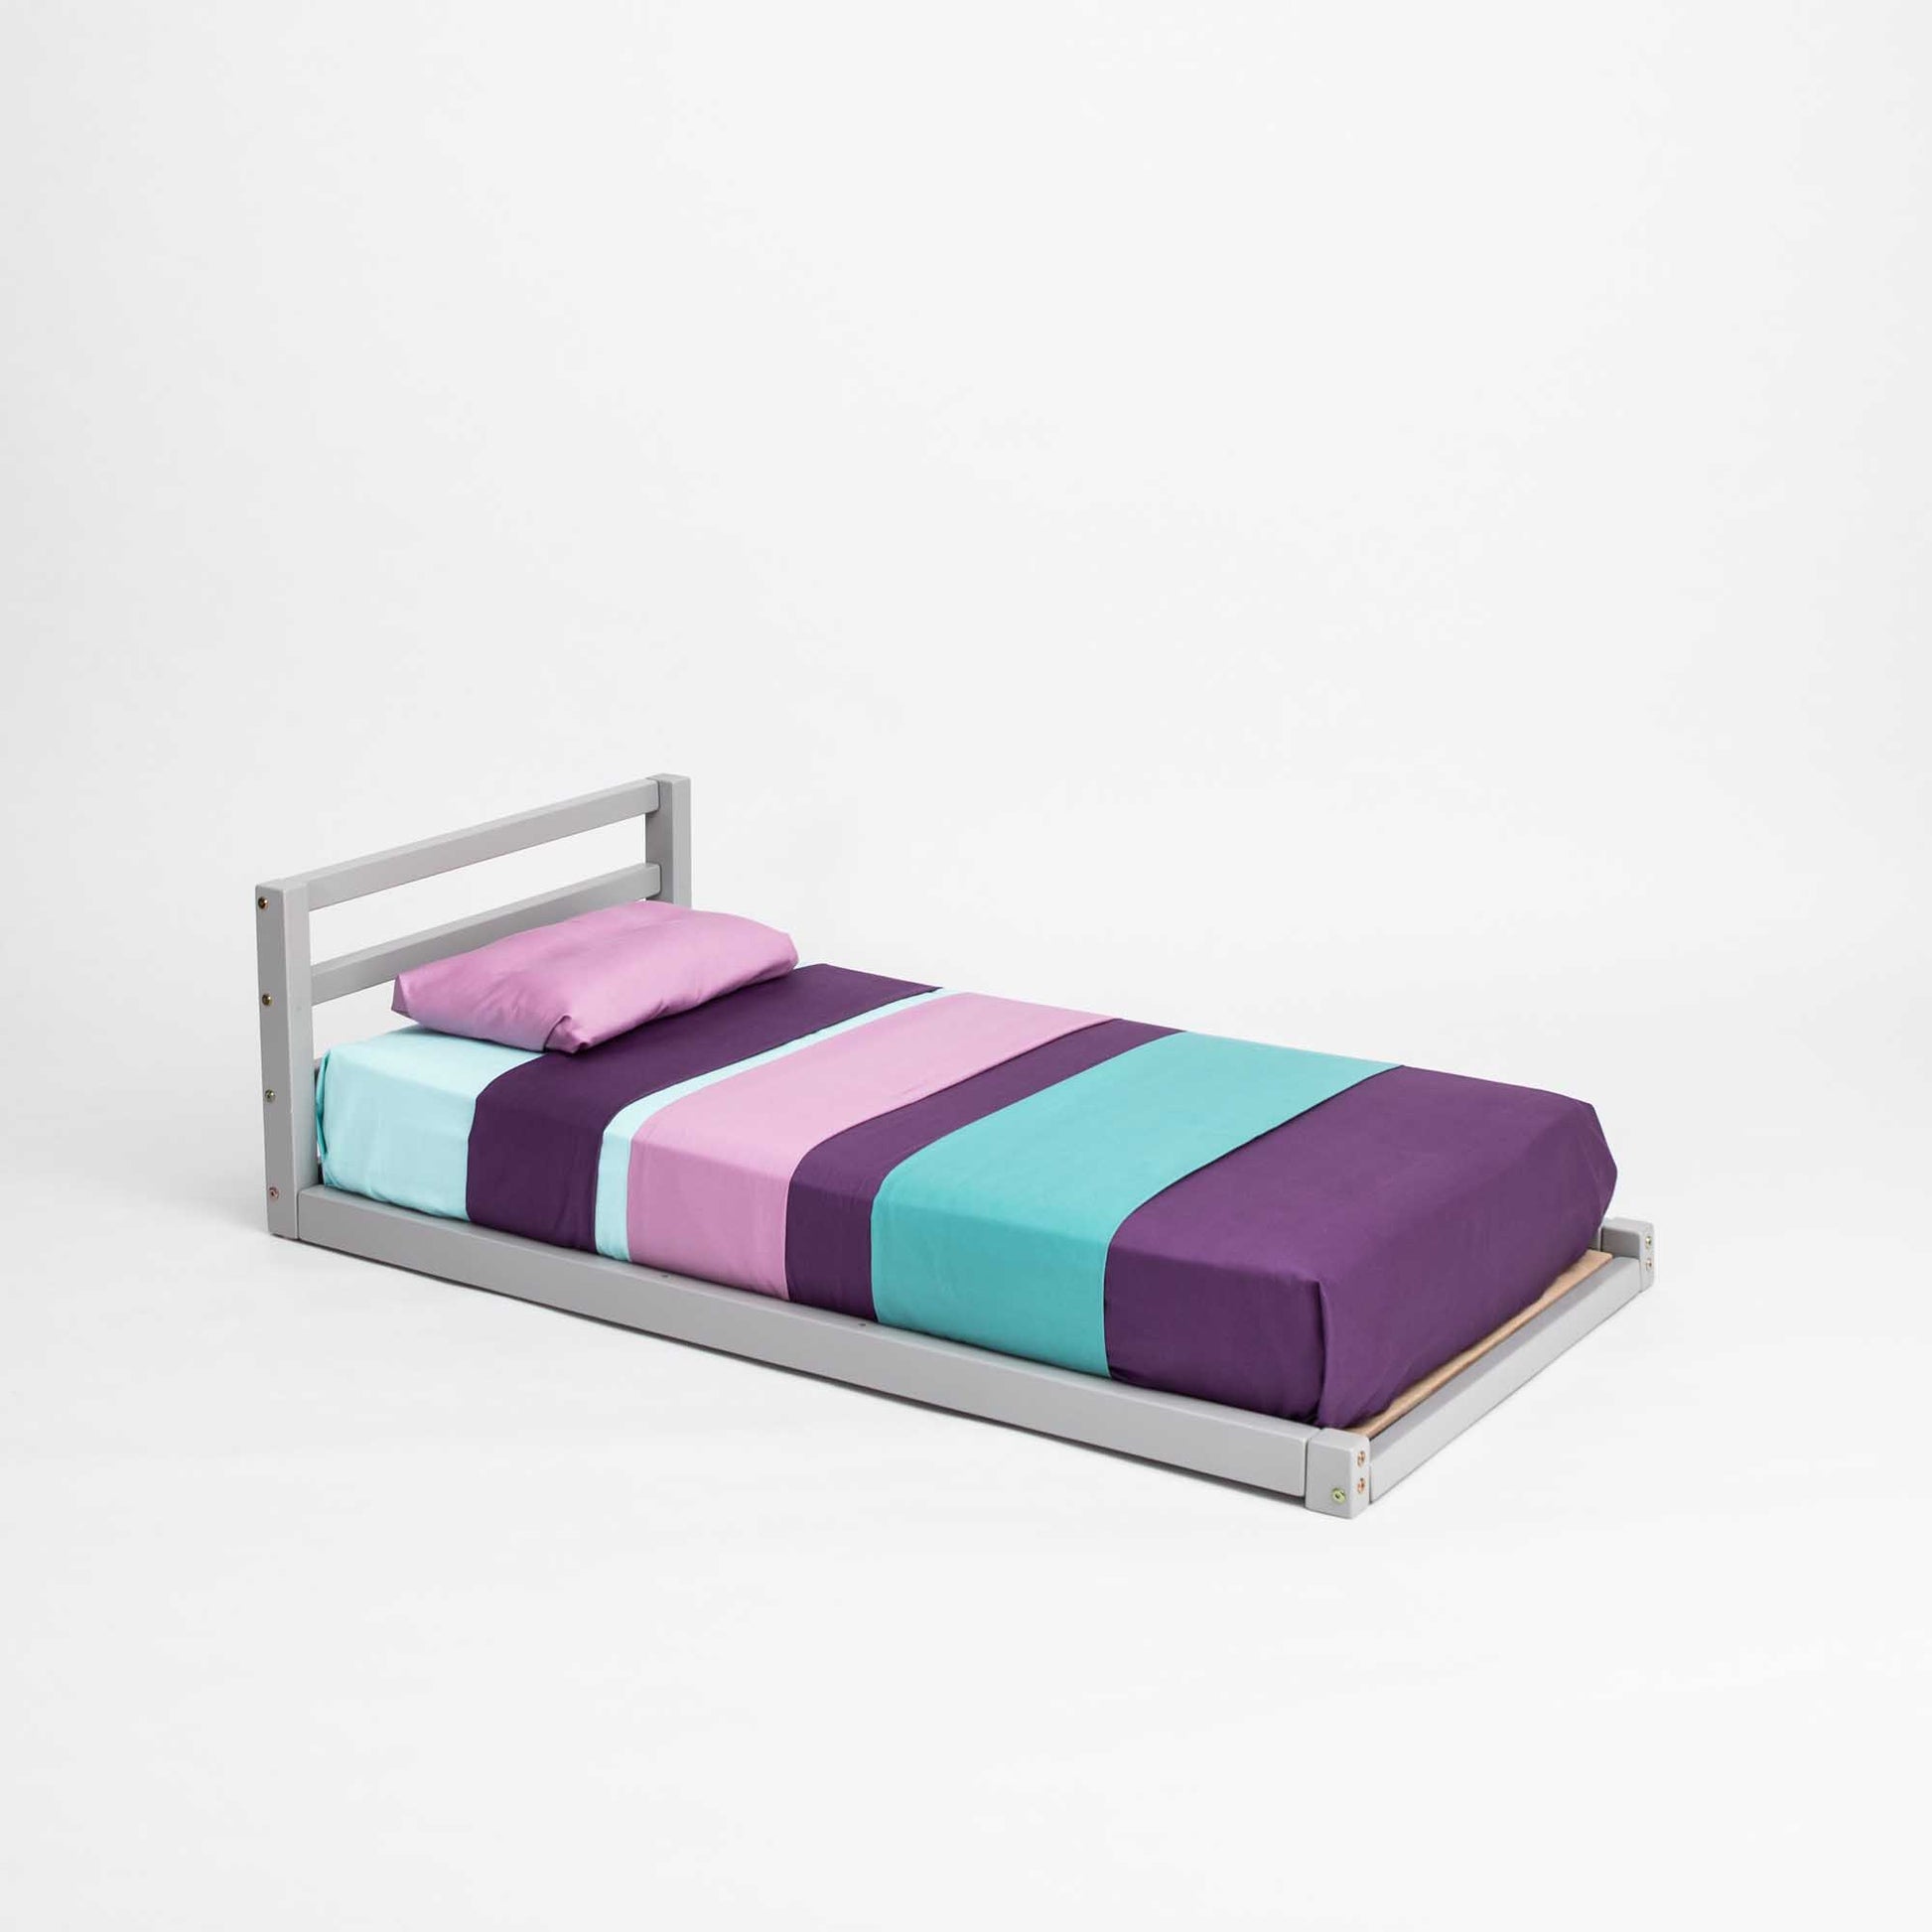 A Sweet Home From Wood toddler floor bed with a horizontal rail headboard, with a purple, blue, and green striped sheet.